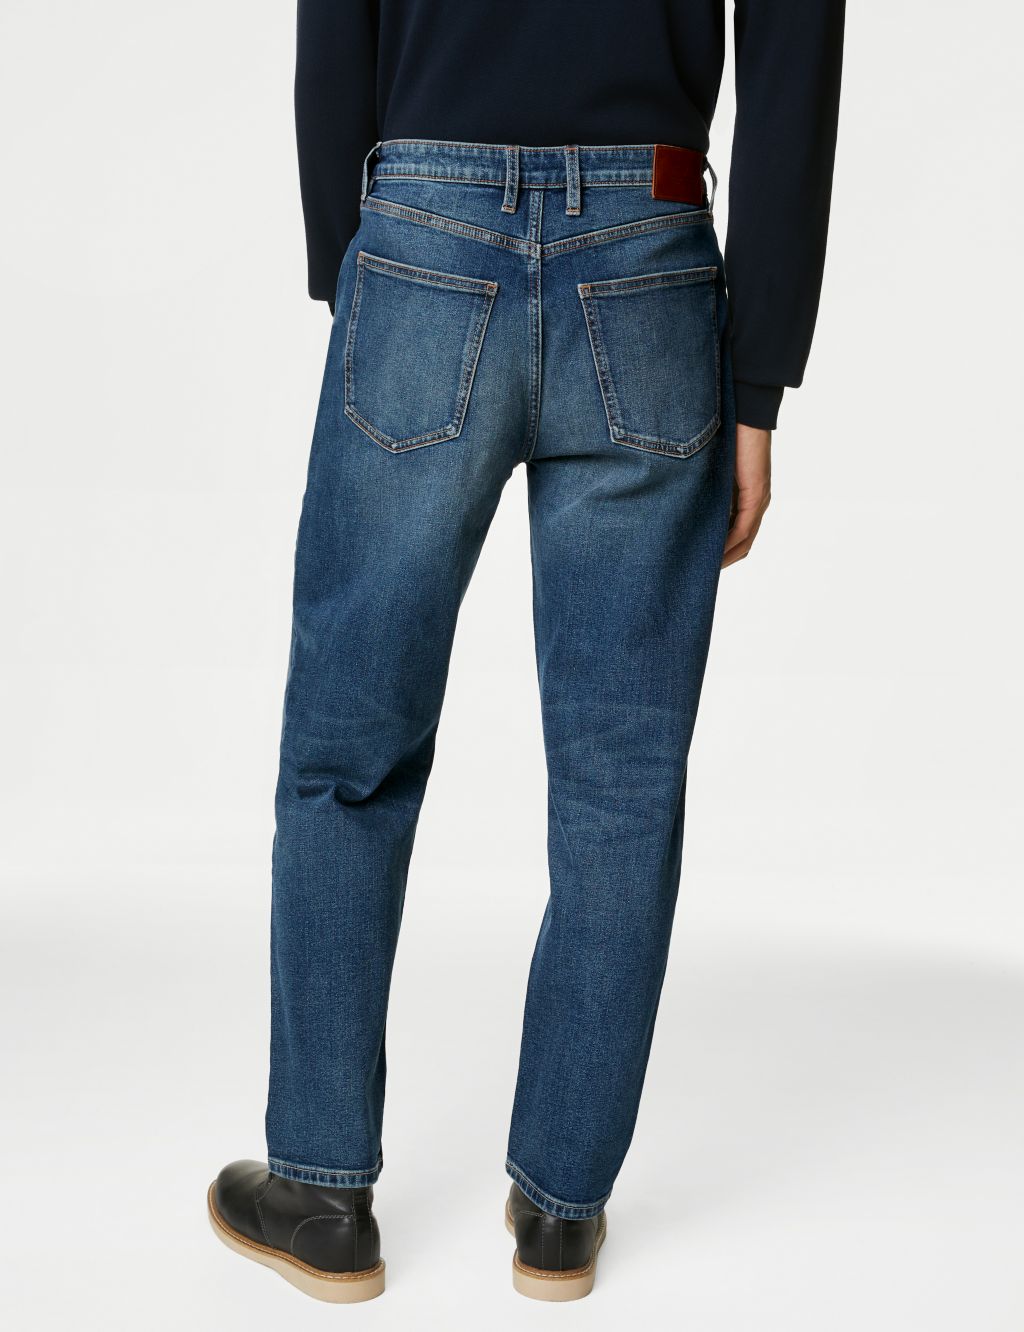 Relaxed Tapered Vintage Wash Jeans image 5